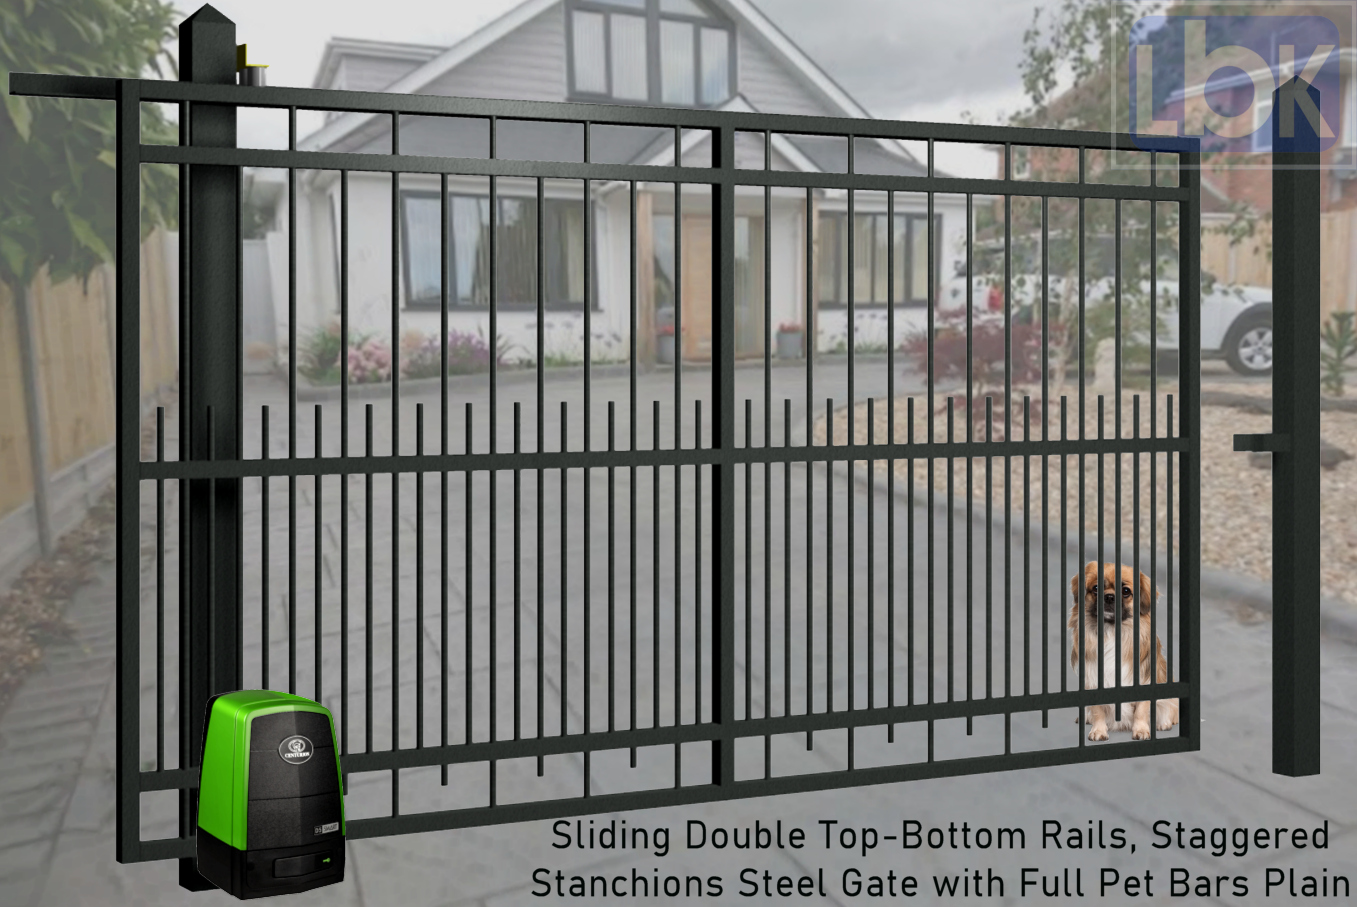 05b Sliding Double Top-Bottom Rails, Staggered Stanchions Steel Gate with Full Pet Bars Plain